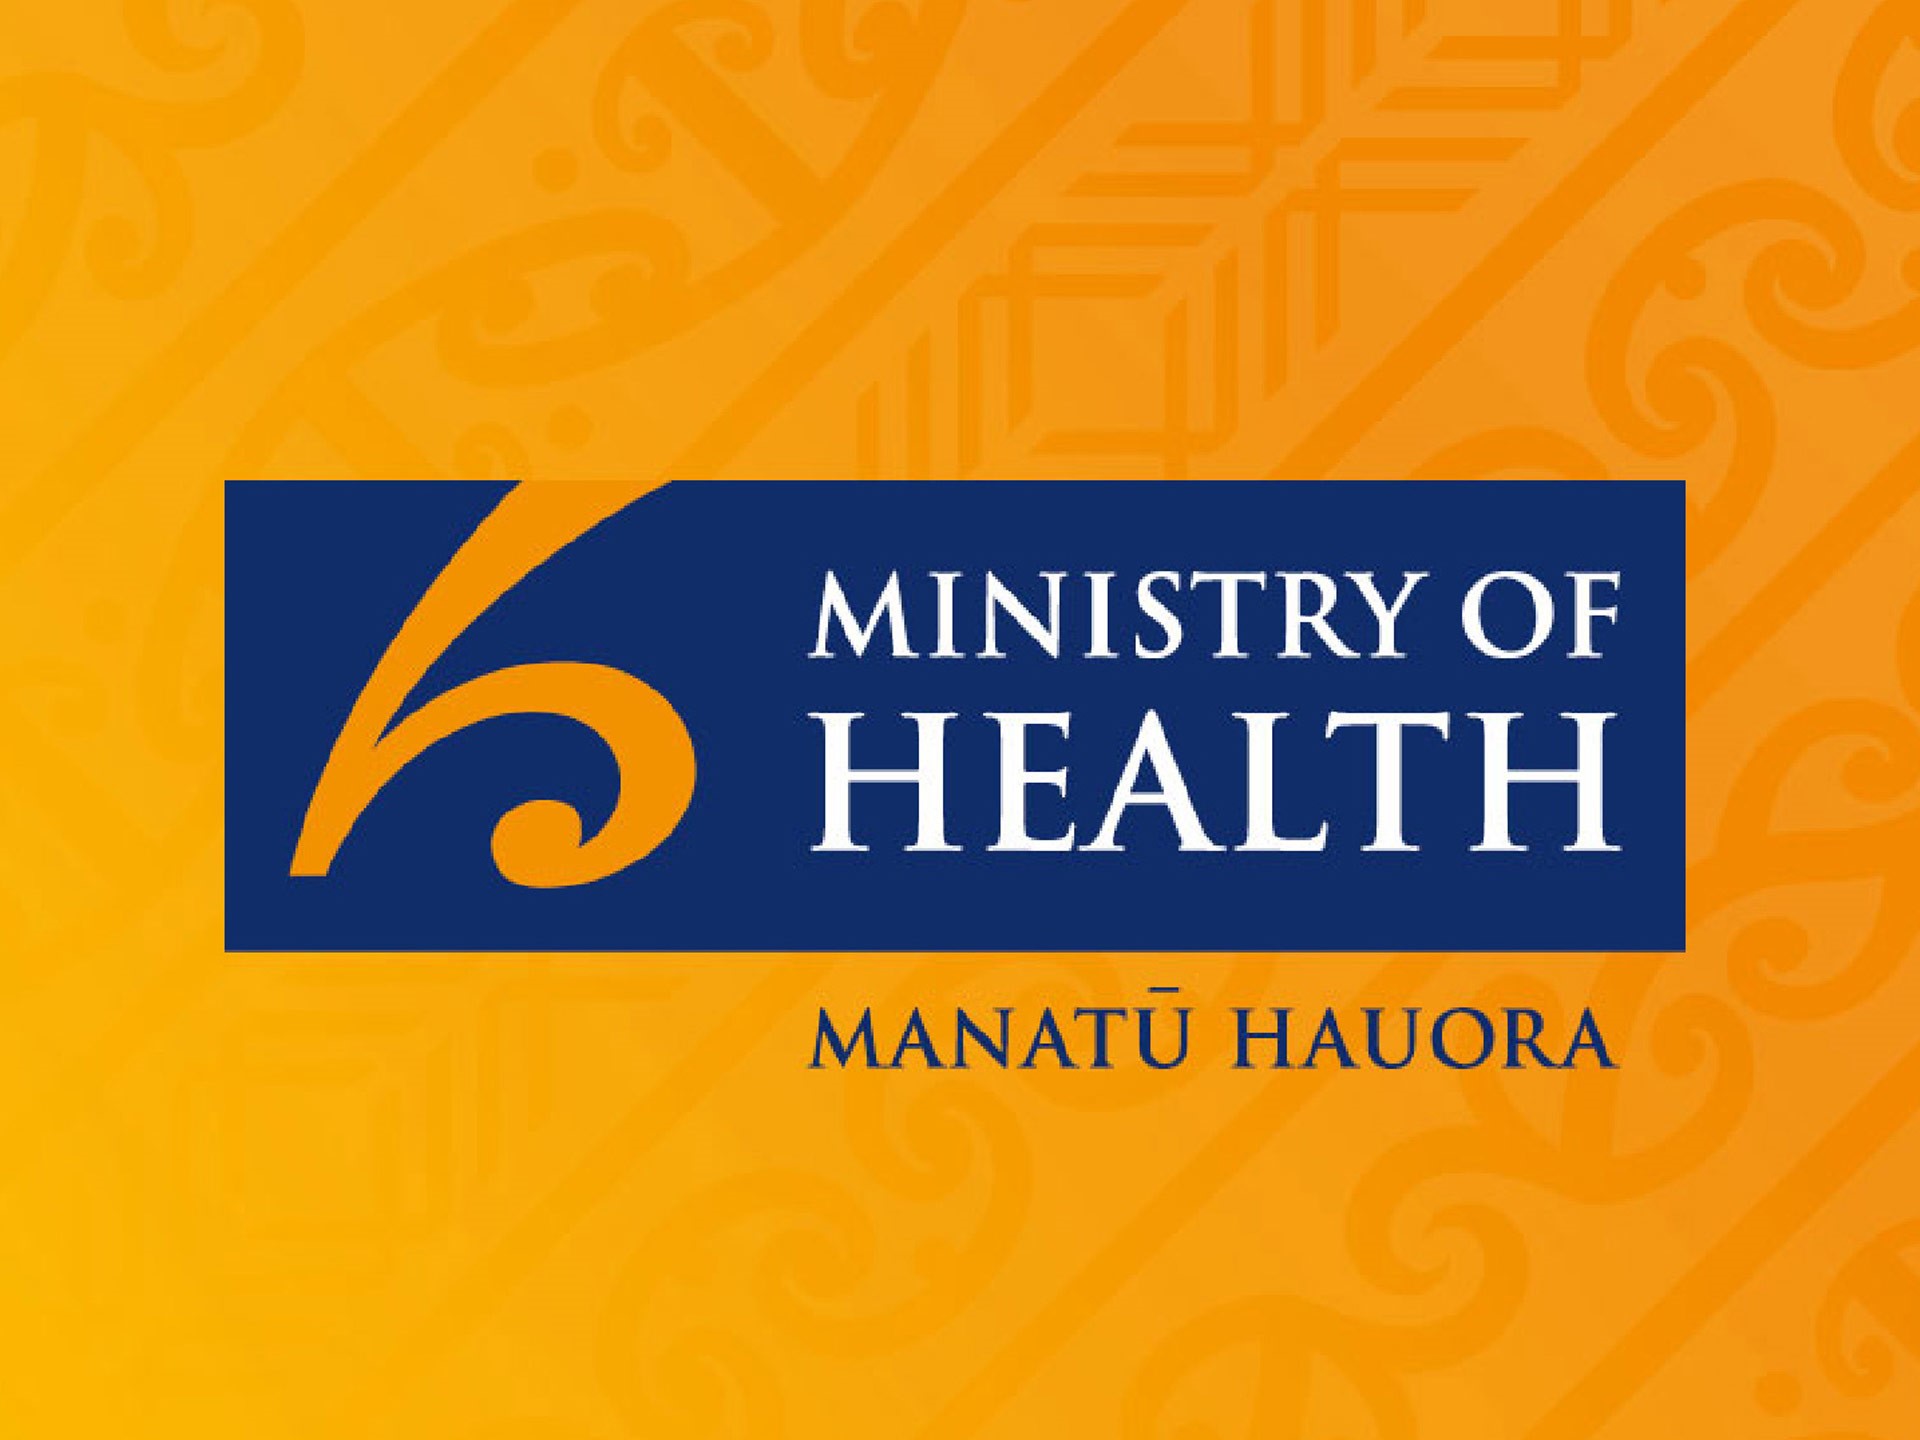 NZ ready to provide $75m for Pacific and global COVID-19 vaccination support